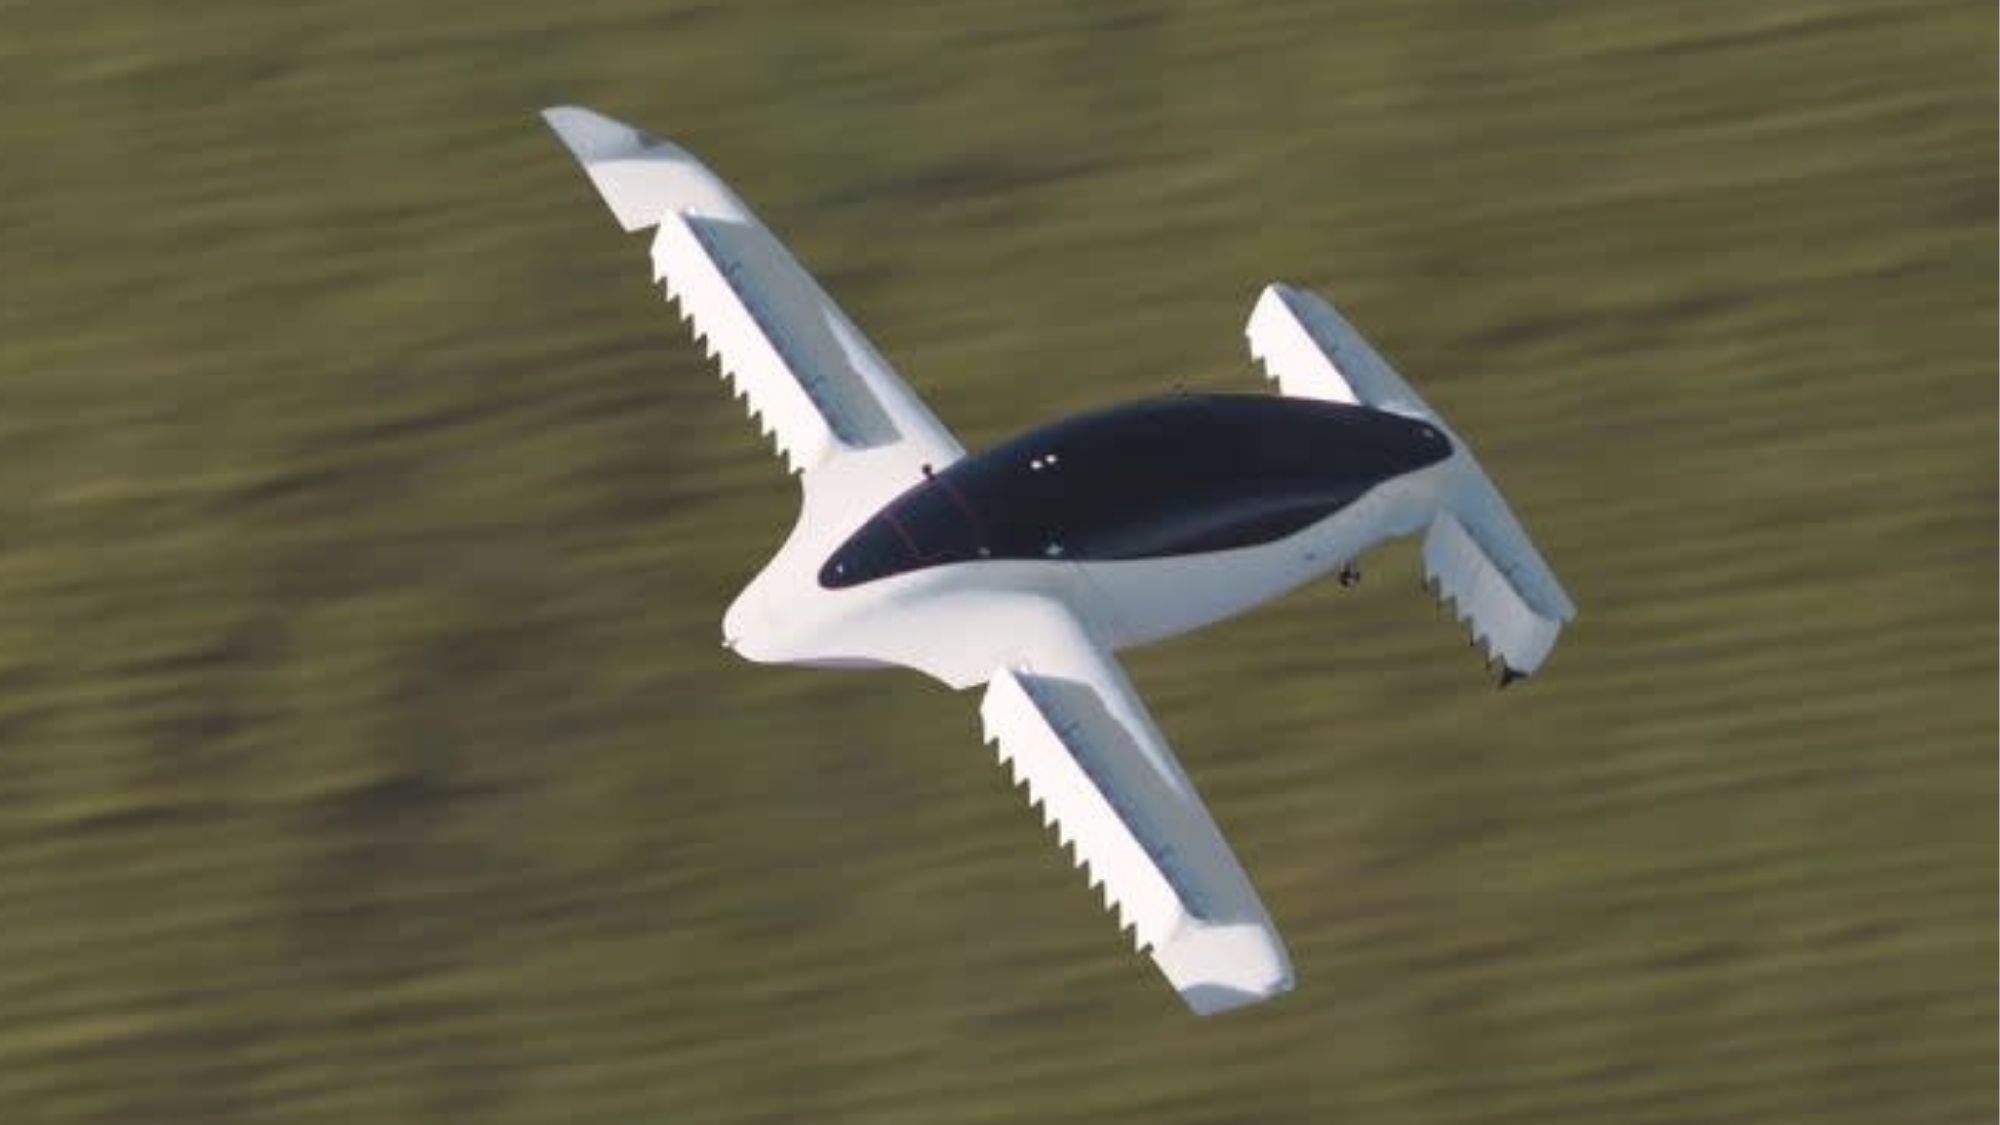 Flying taxis could poach passengers from planes, Avolon says